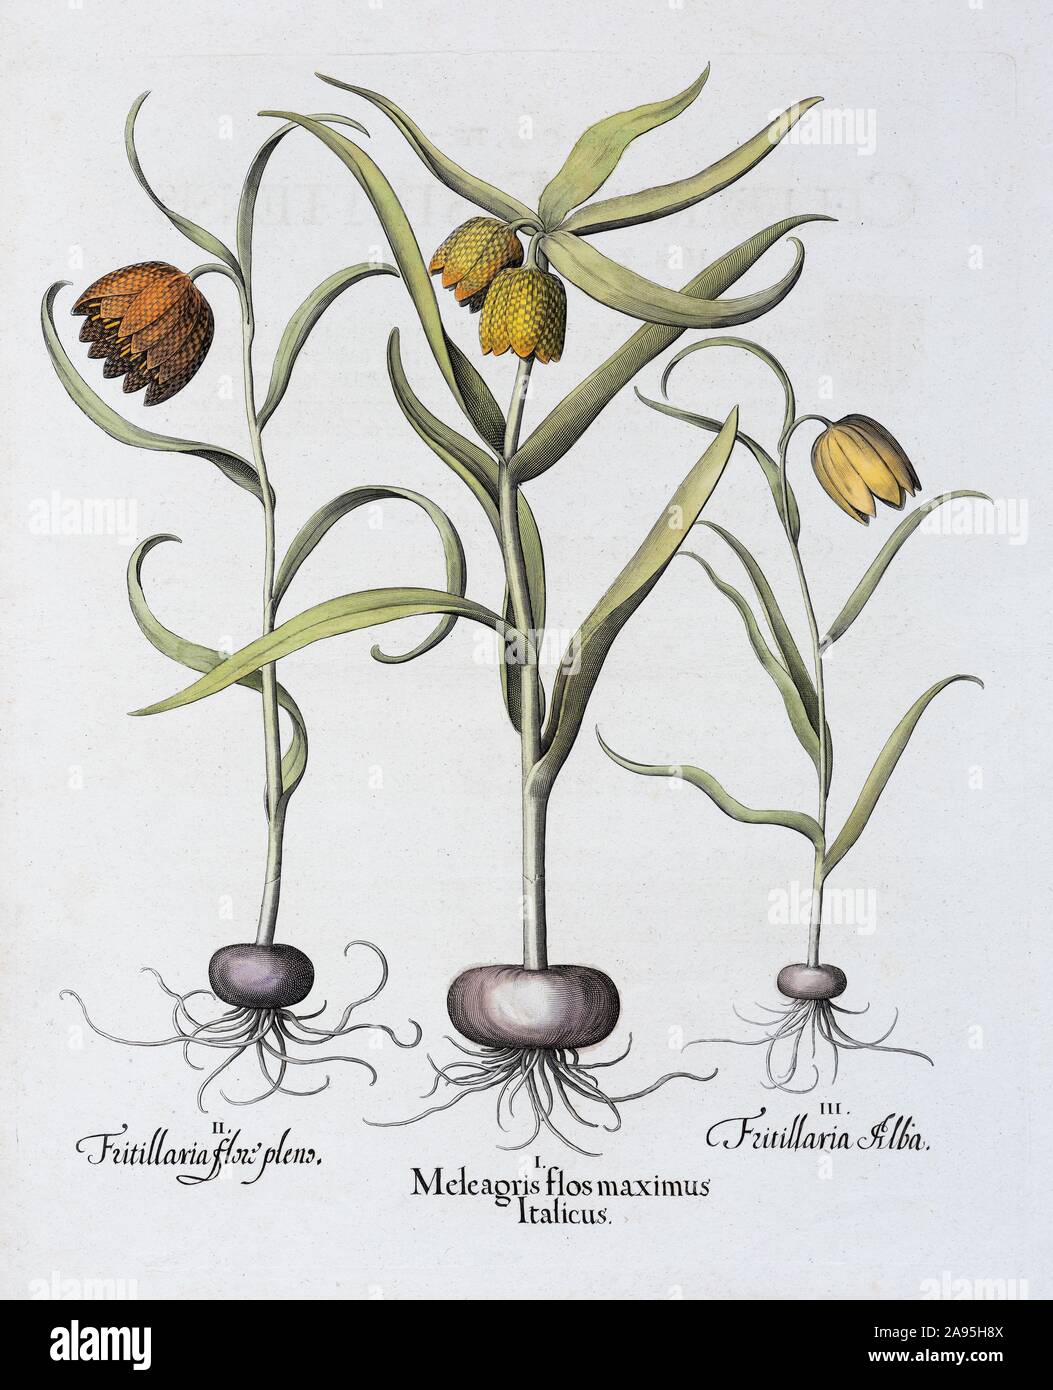 Snake's Head Fritillary (Fritillaria meleagris), hand coloured copper engraving by Basilius Besler, from Hortus Eystettensis, 1613, Germany Stock Photo